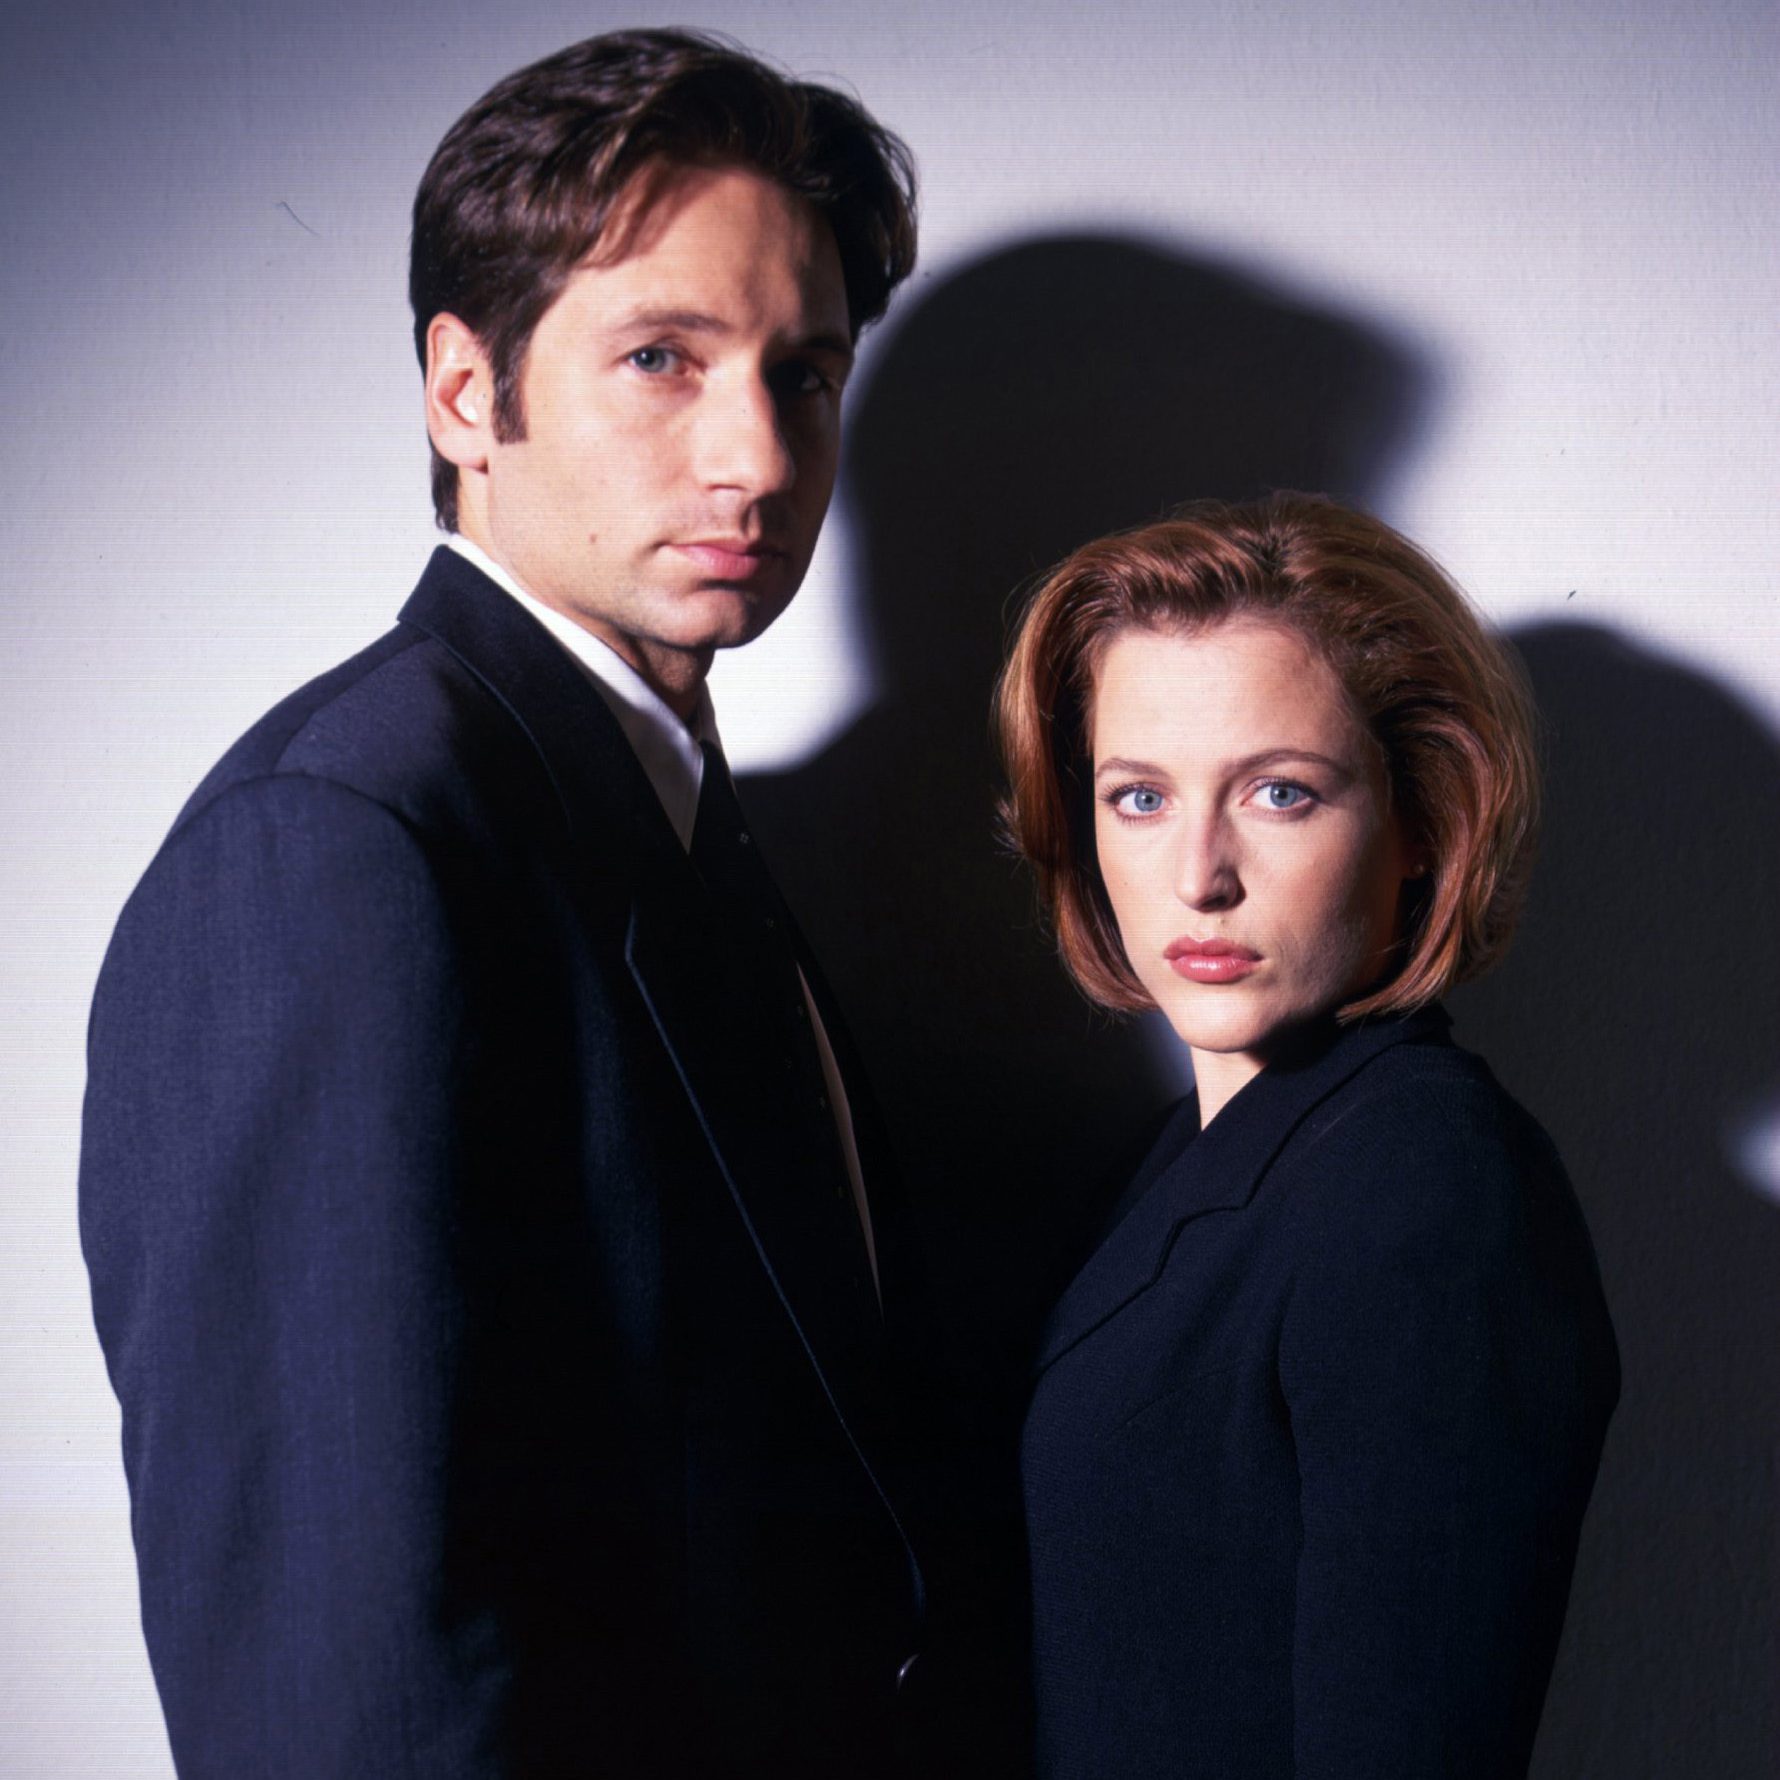 David Duchovny and Gillian Anderson in the X-Files, 1990s